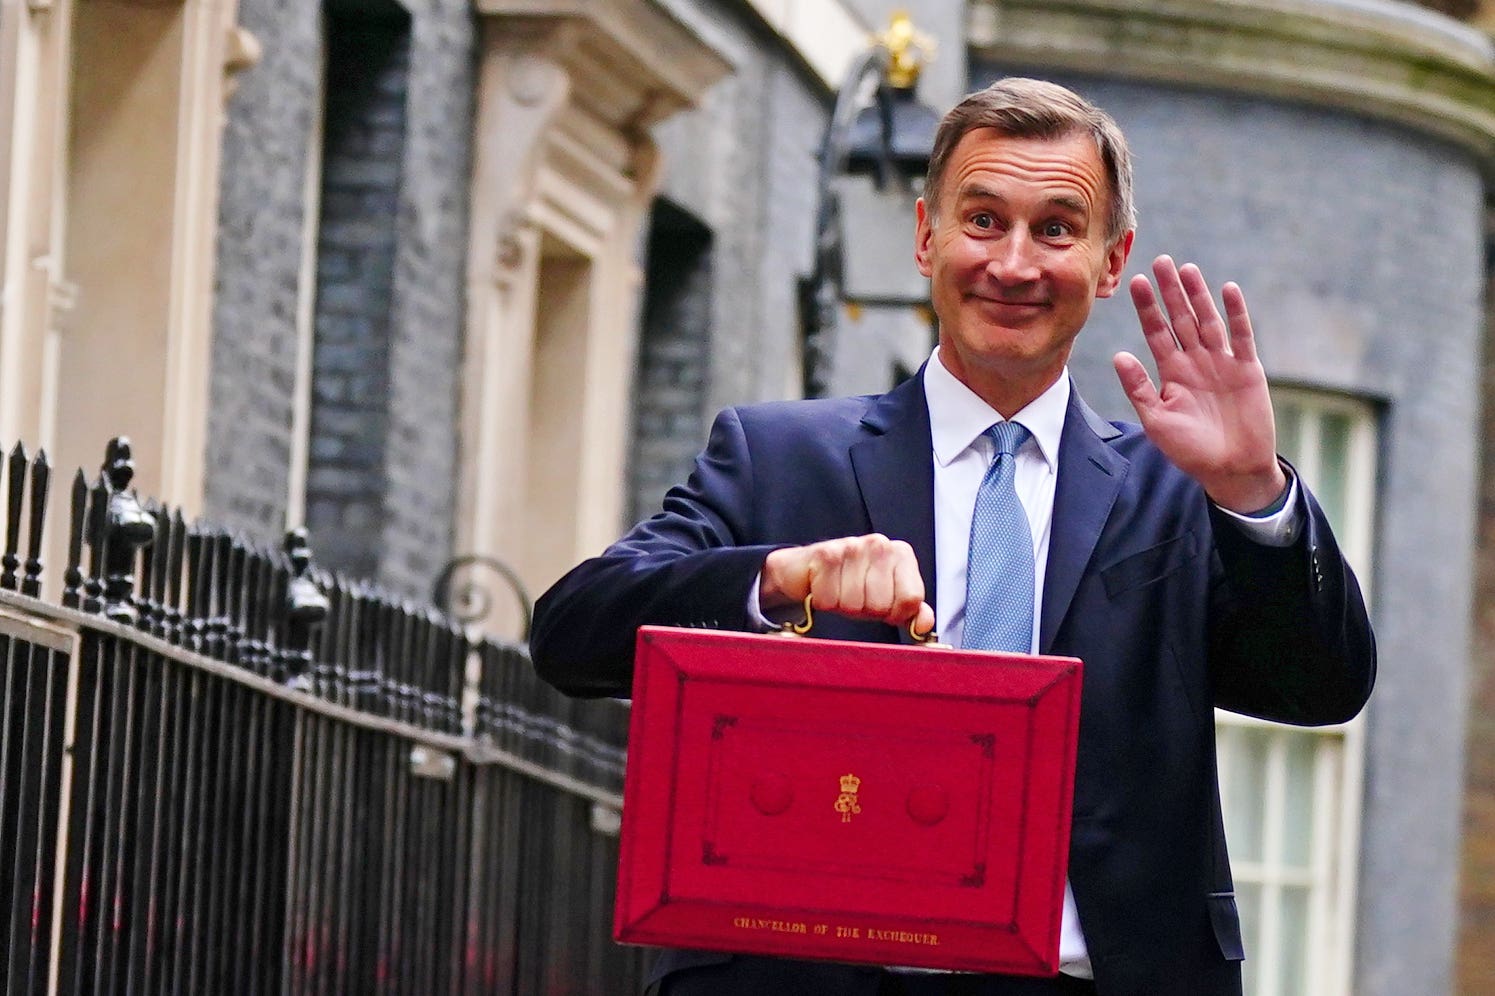 Chancellor of the Exchequer Jeremy Hunt has hinted at tax cuts before the next election